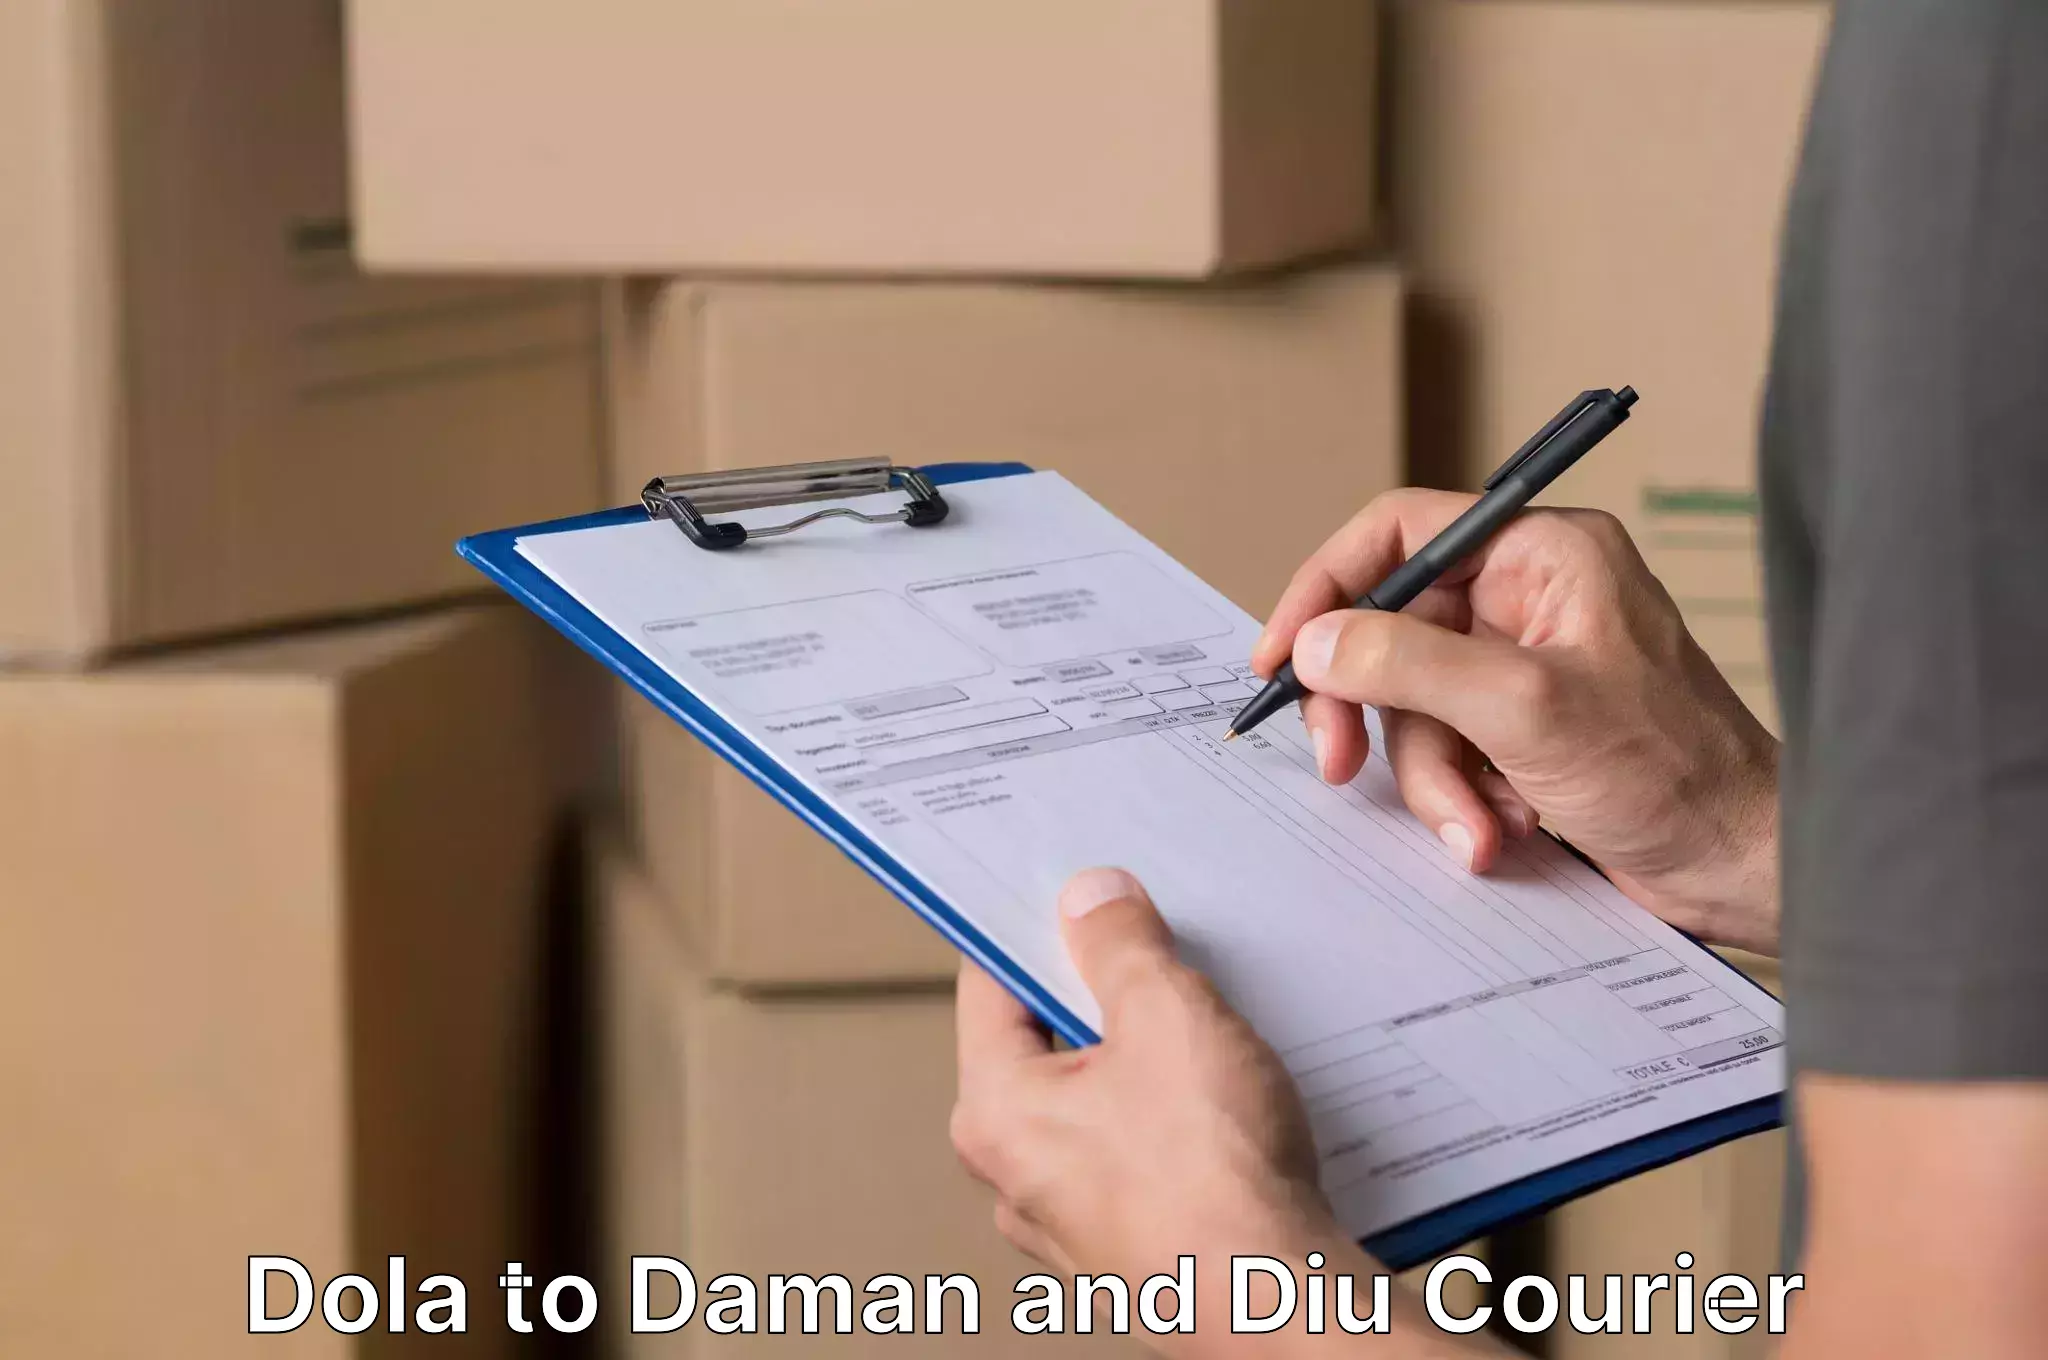 Furniture delivery service Dola to Daman and Diu